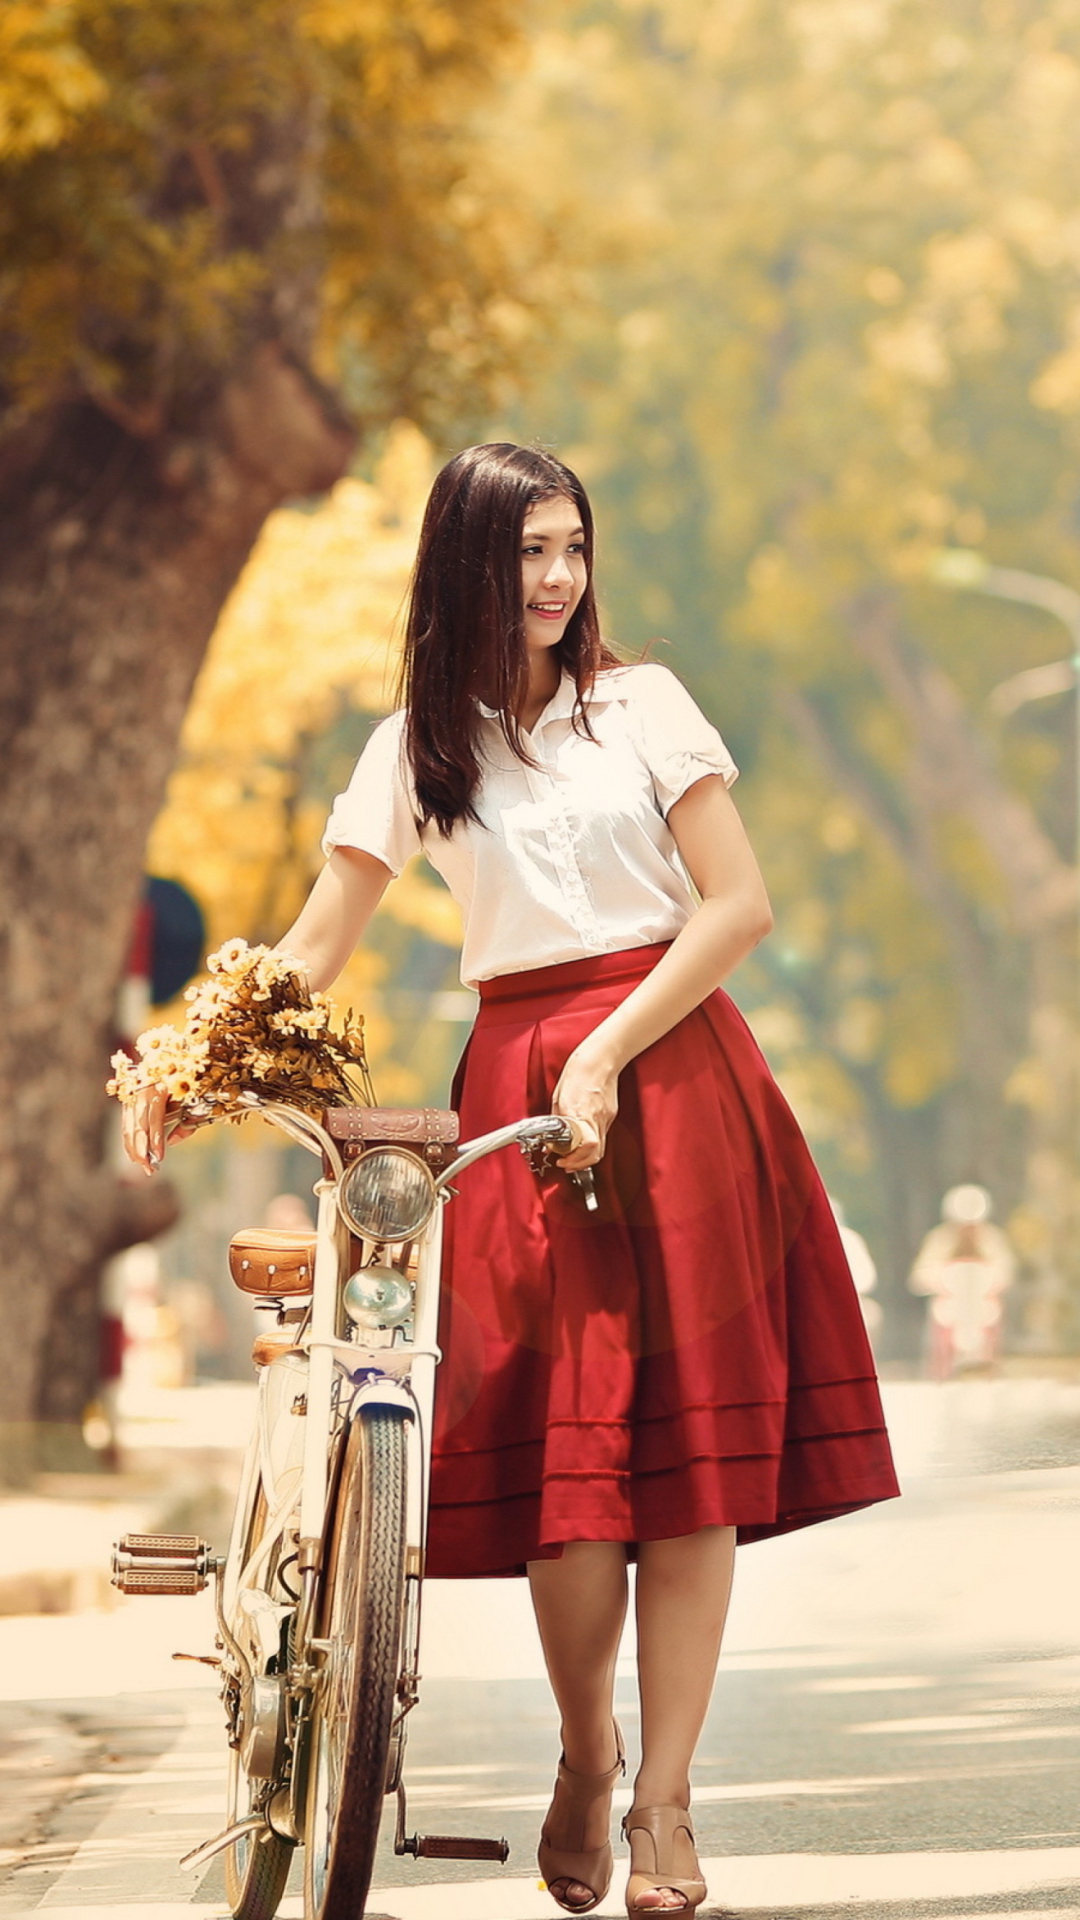 Romantic Girl With Bicycle And Flowers wallpaper 1080x1920